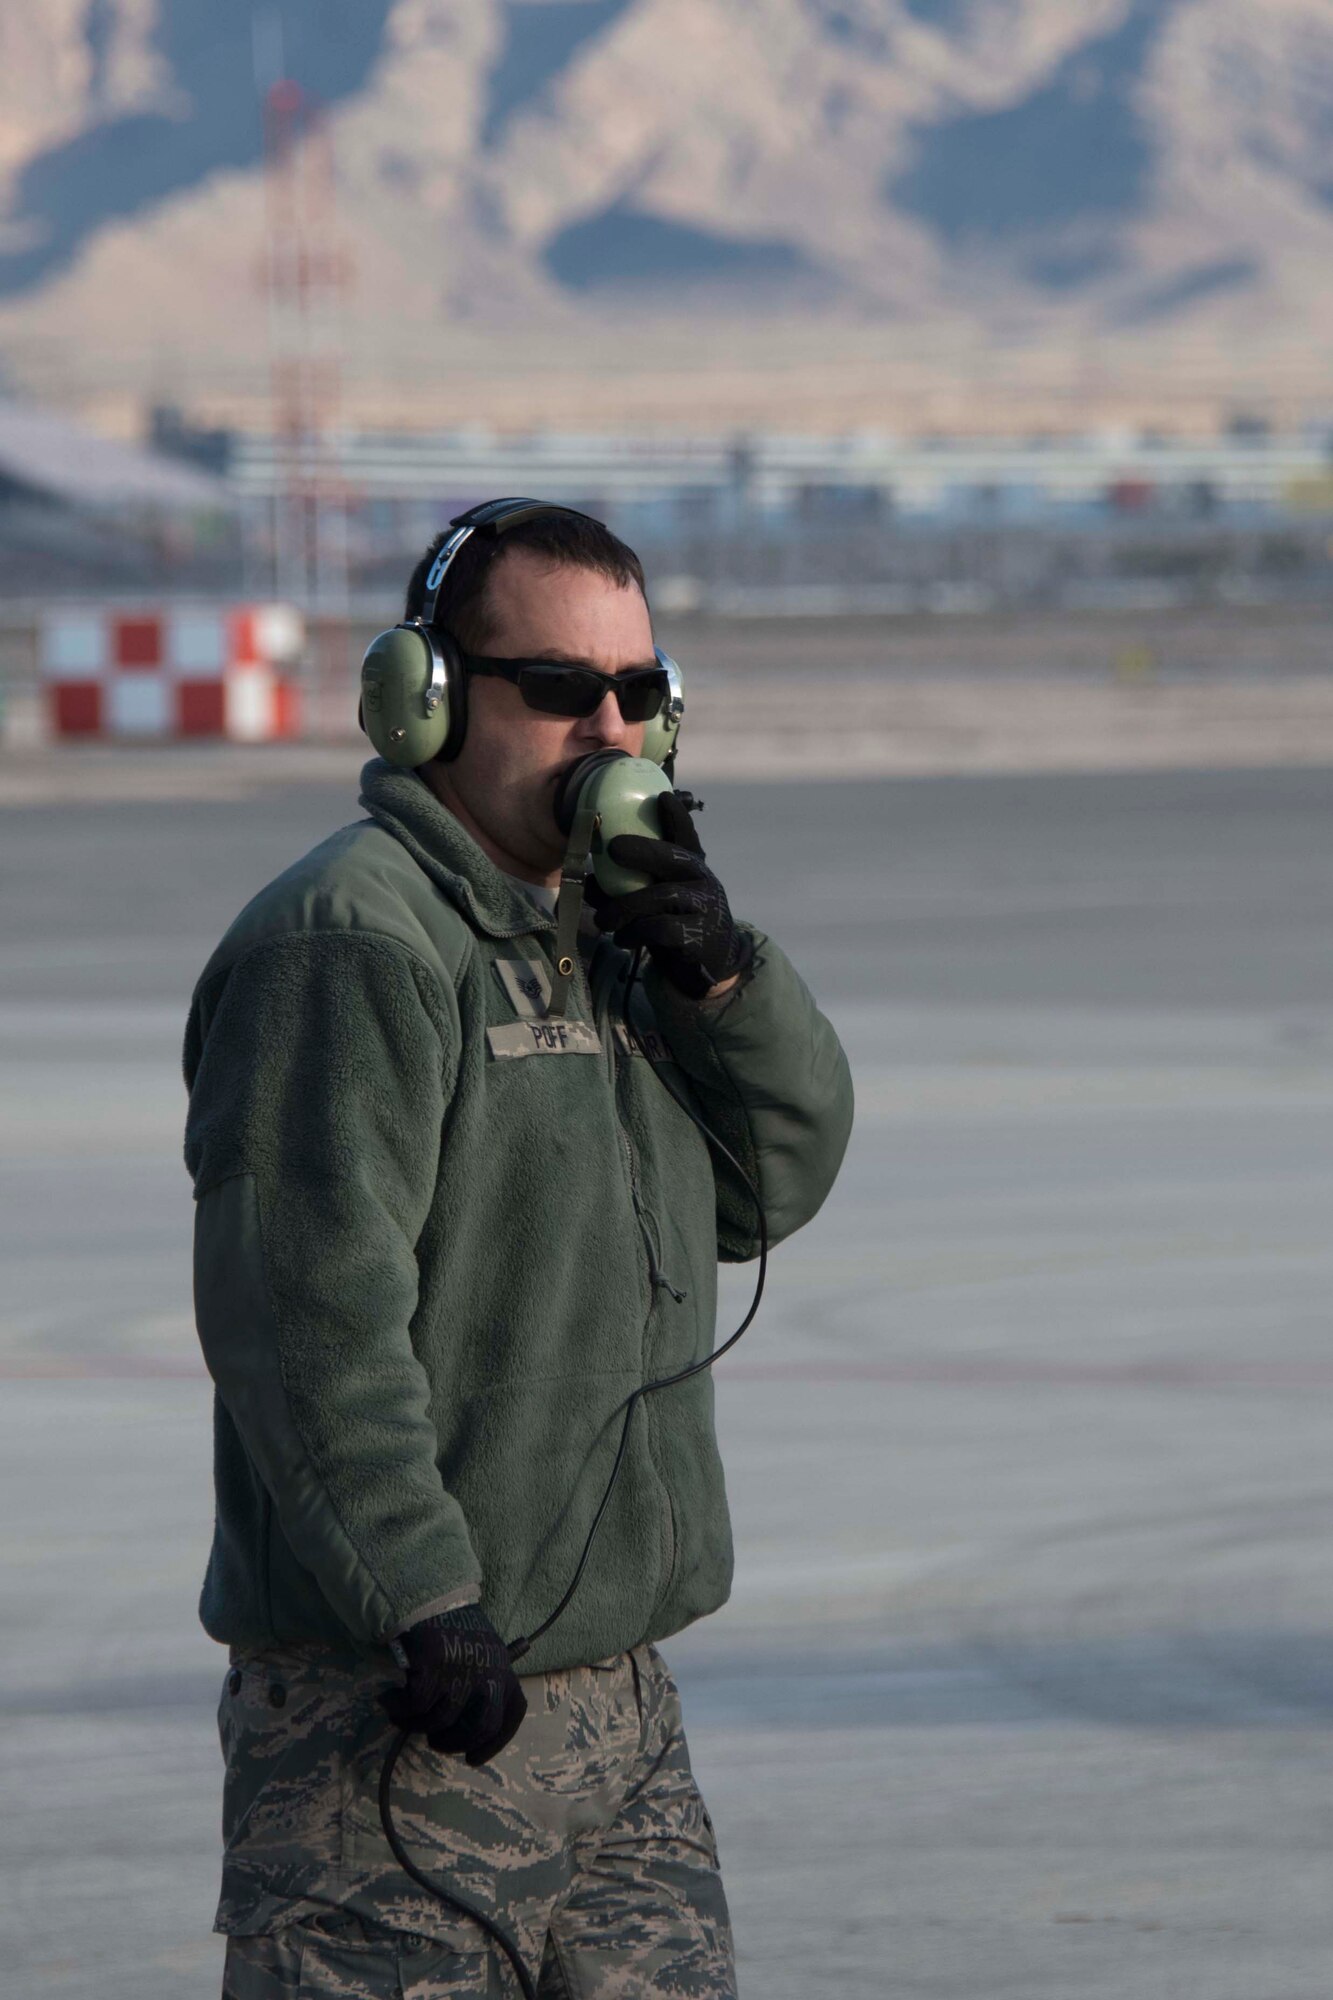 U.S. Air Force Tech. Sgt. Rick Poff, 307th Aircraft Maintenance Squadron crew chief, communicates with B-52 Stratofortress air crew prior to a sortie, Dec. 11, 2018 at Nellis Air Force Base, Nevada.  He was on hand, along with other active-duty and Reserve Citizen Airmen maintainers, to support the the biannual Weapons School Integration exercise. (U.S. Air Force photo by Master Sgt. Ted Daigle)